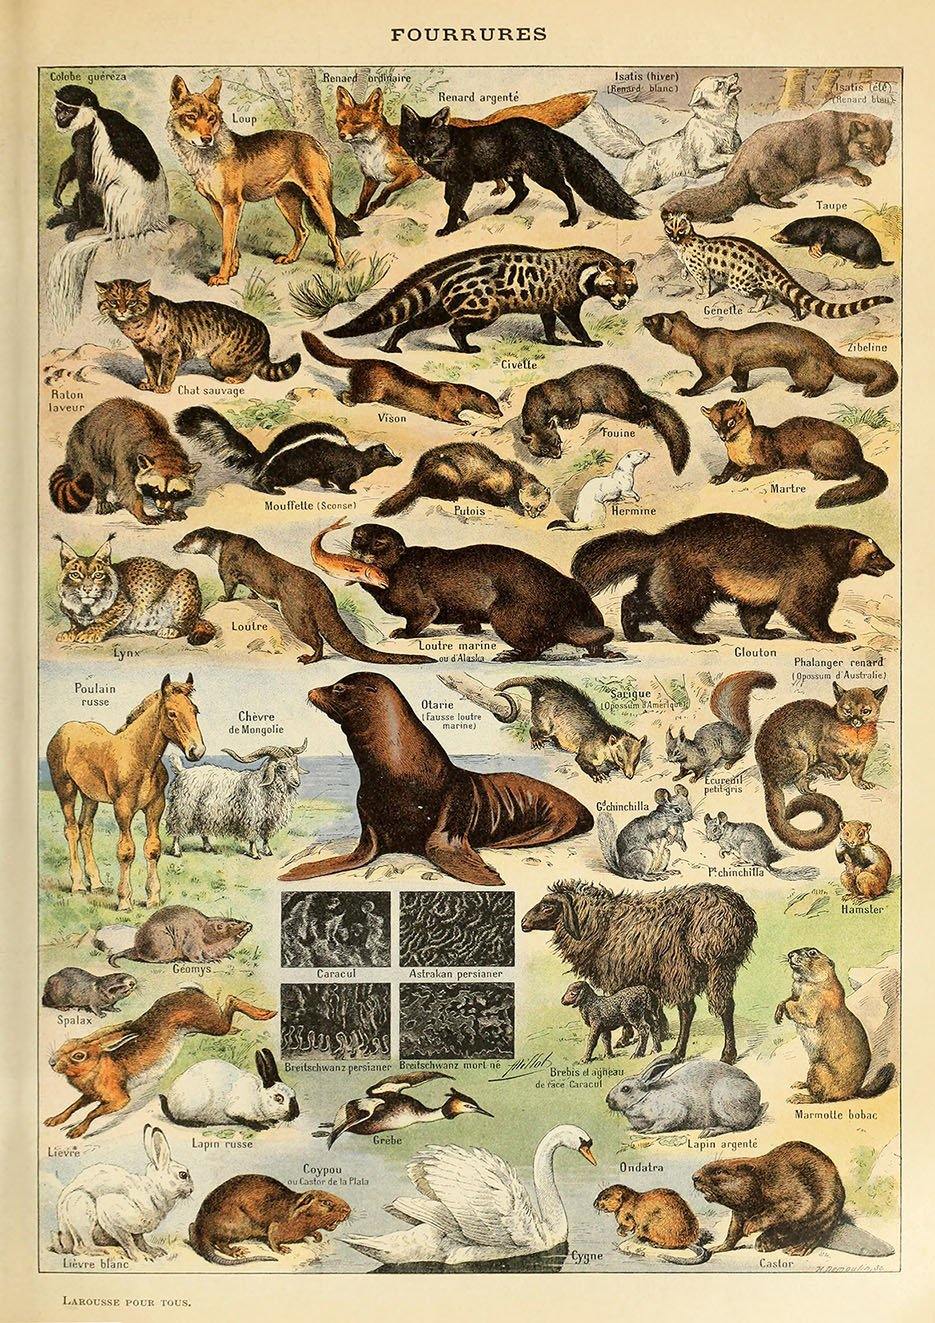 FURRY ANIMALS POSTER: French Art Print by Millot - Pimlico Prints